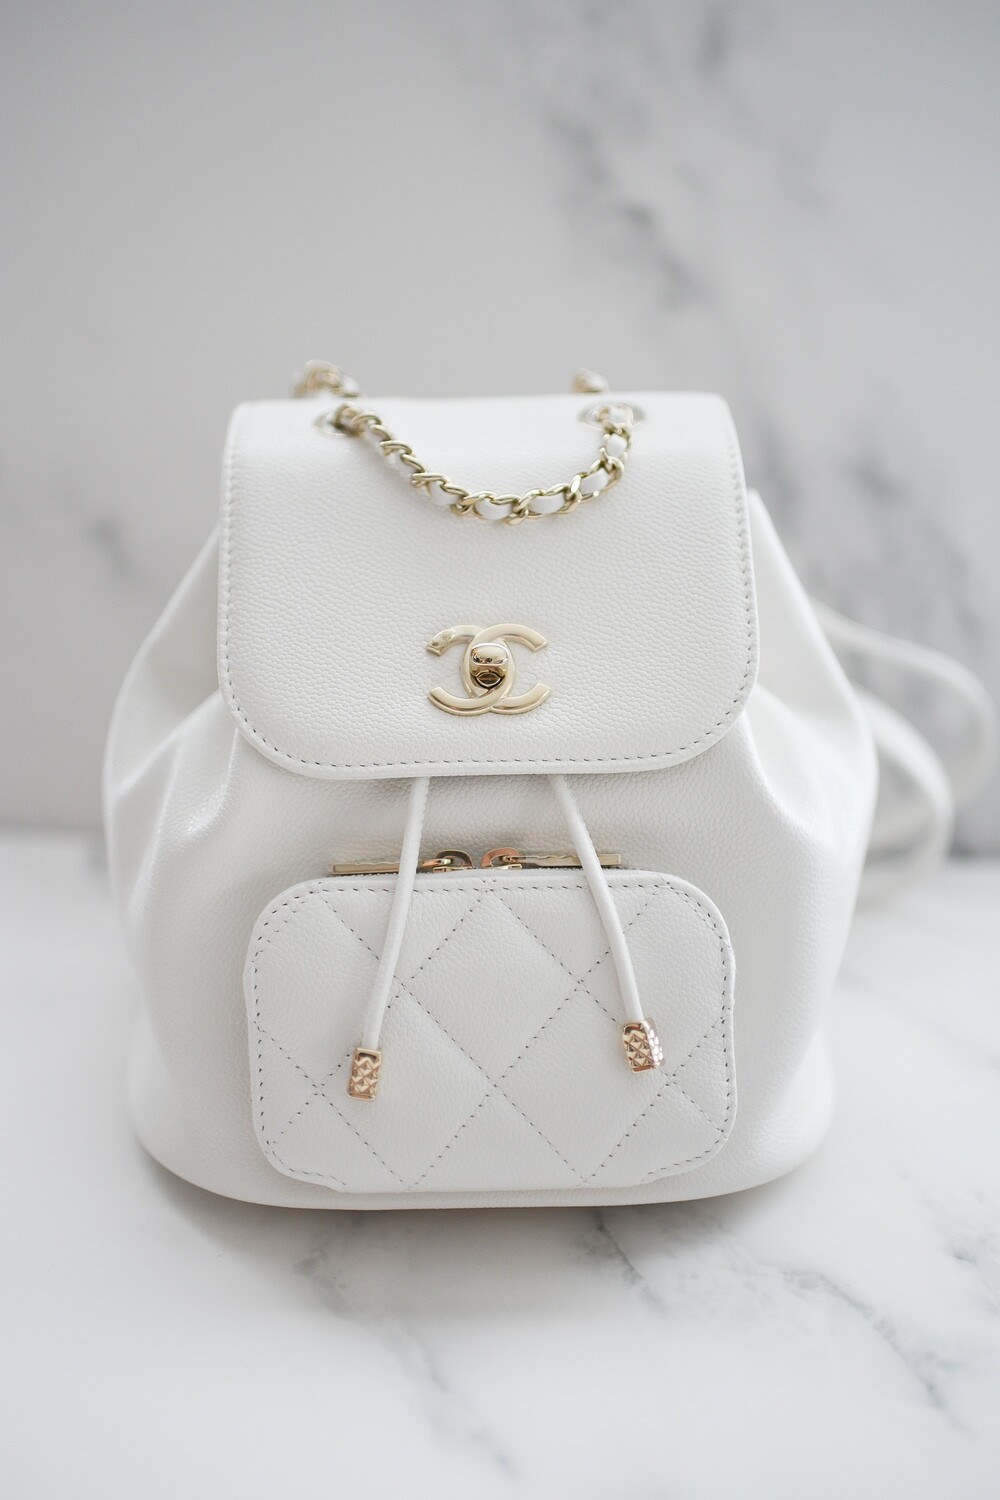 Chanel Business Affinity Drawstring Backpack, White Caviar Leather with  Gold Hardware, New in Box GA001